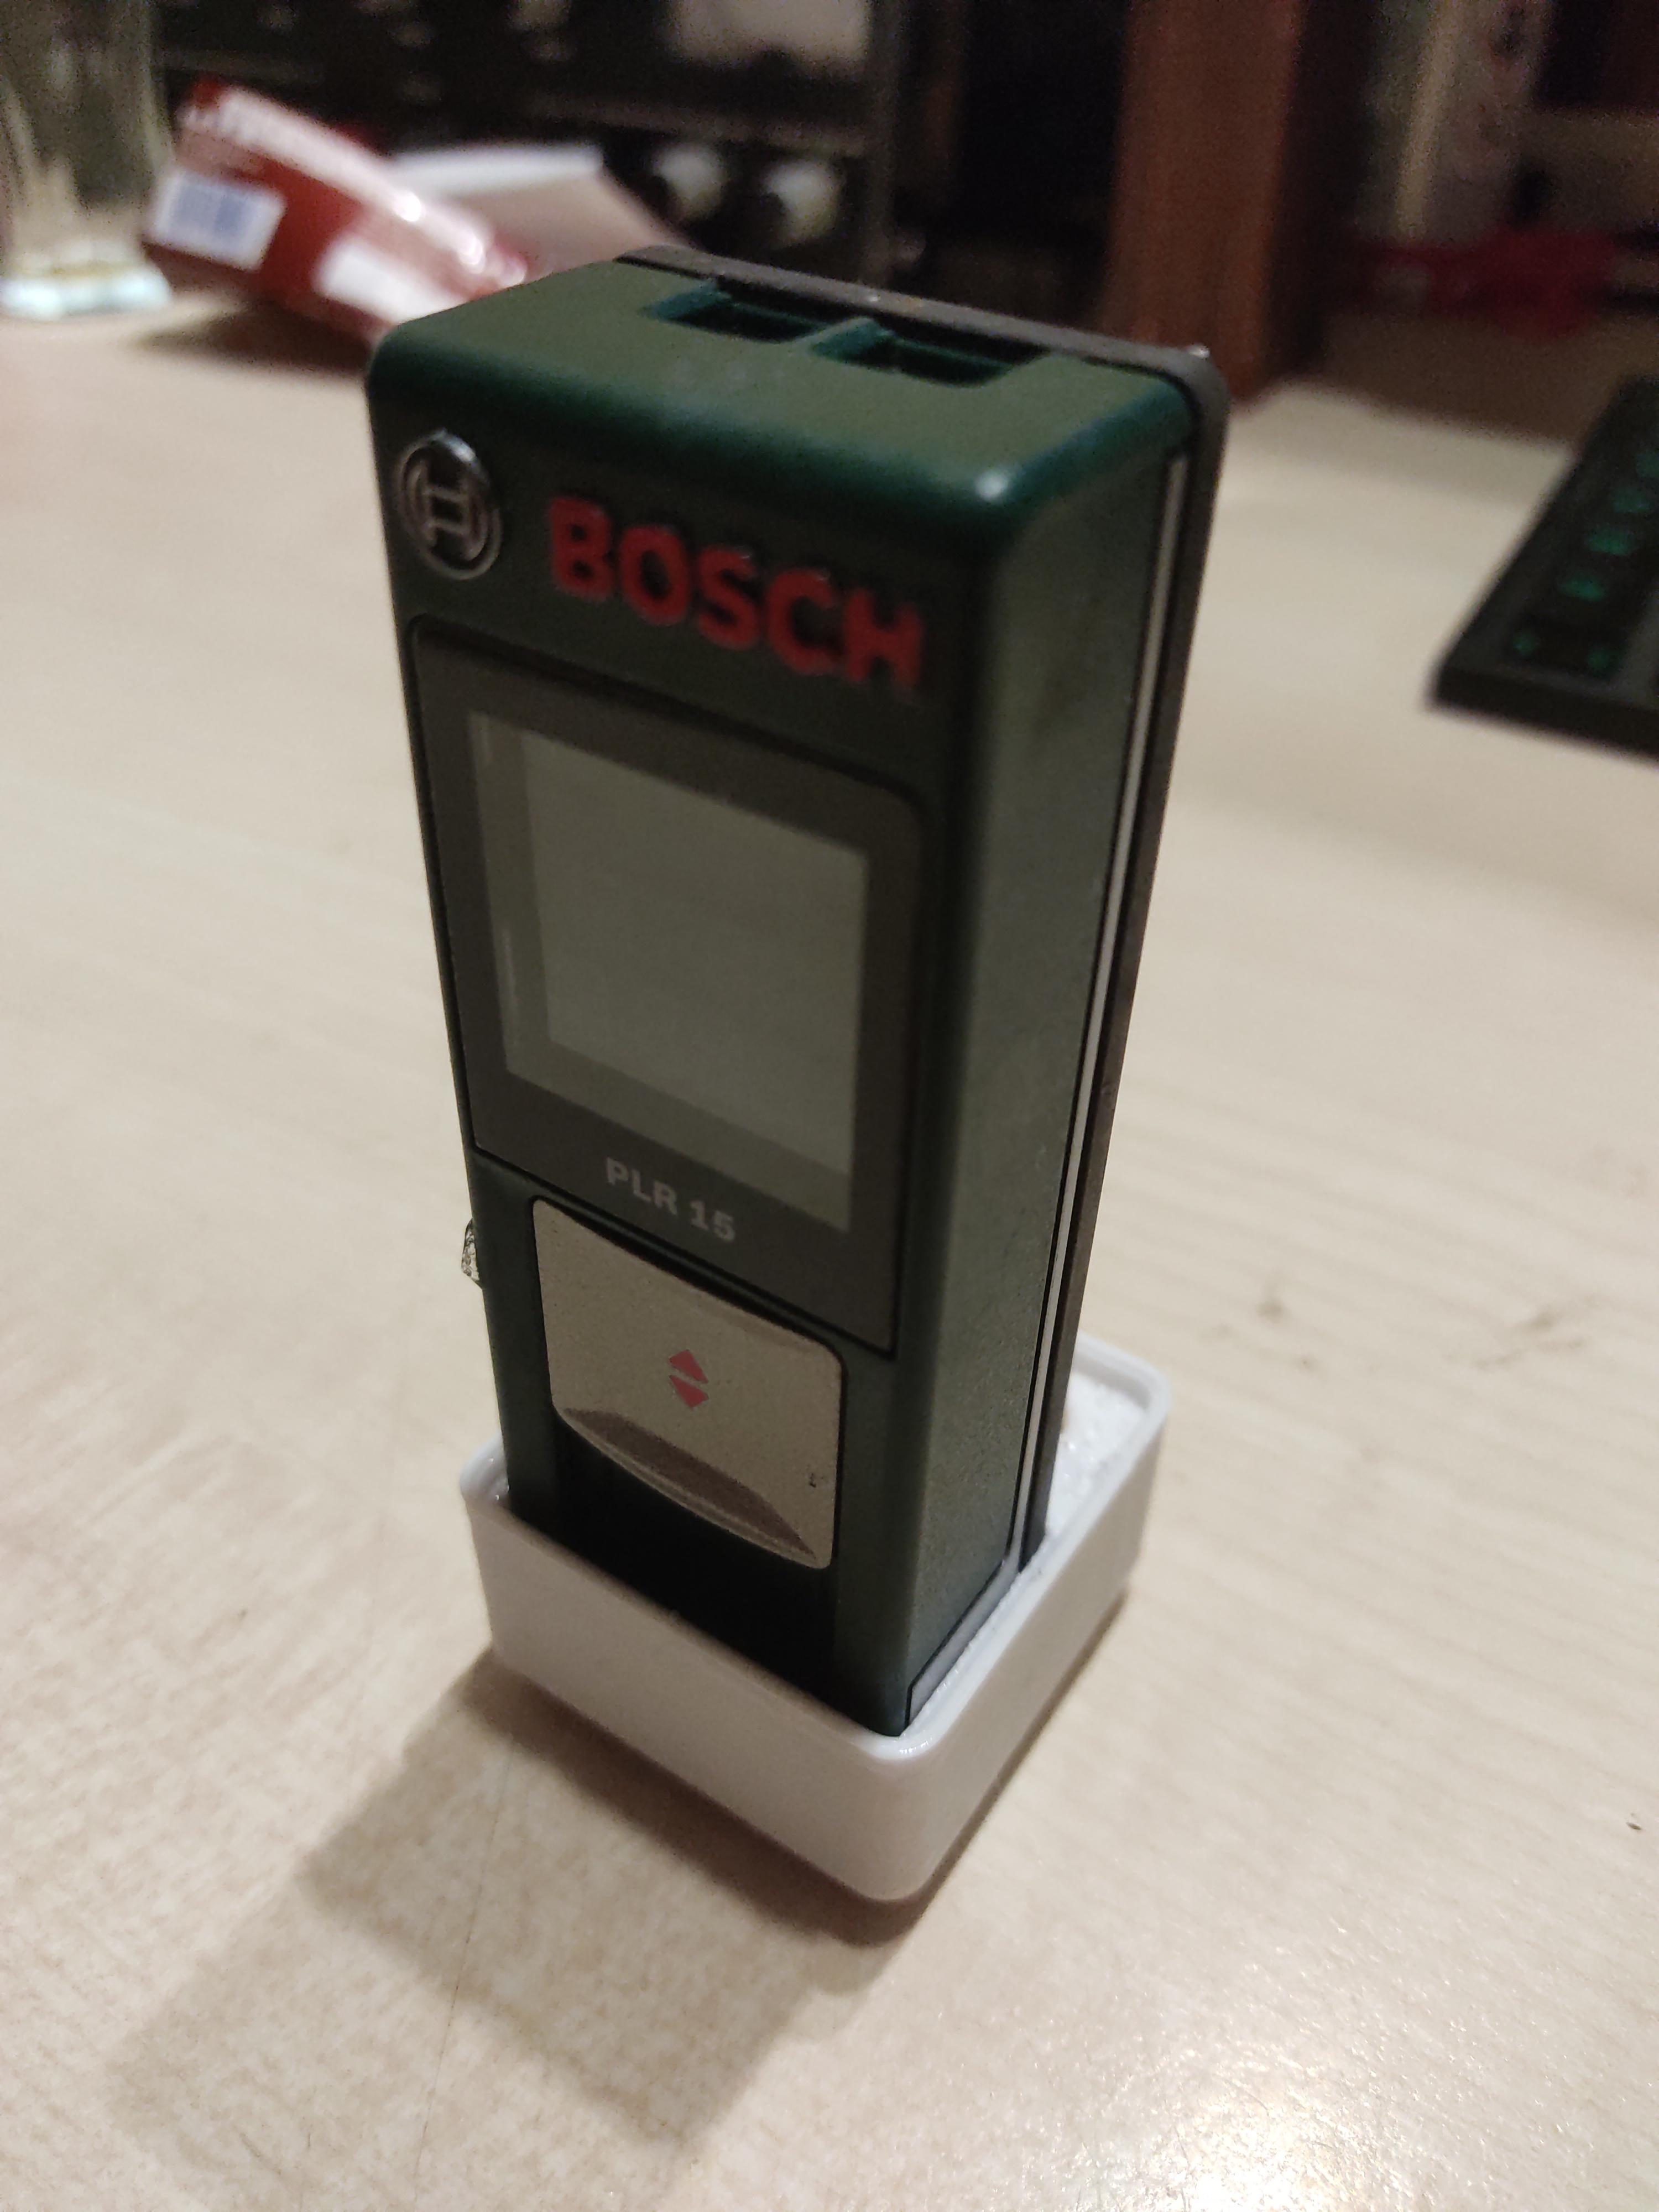 #gridfinity Bosch laser and pencil holder 3d model